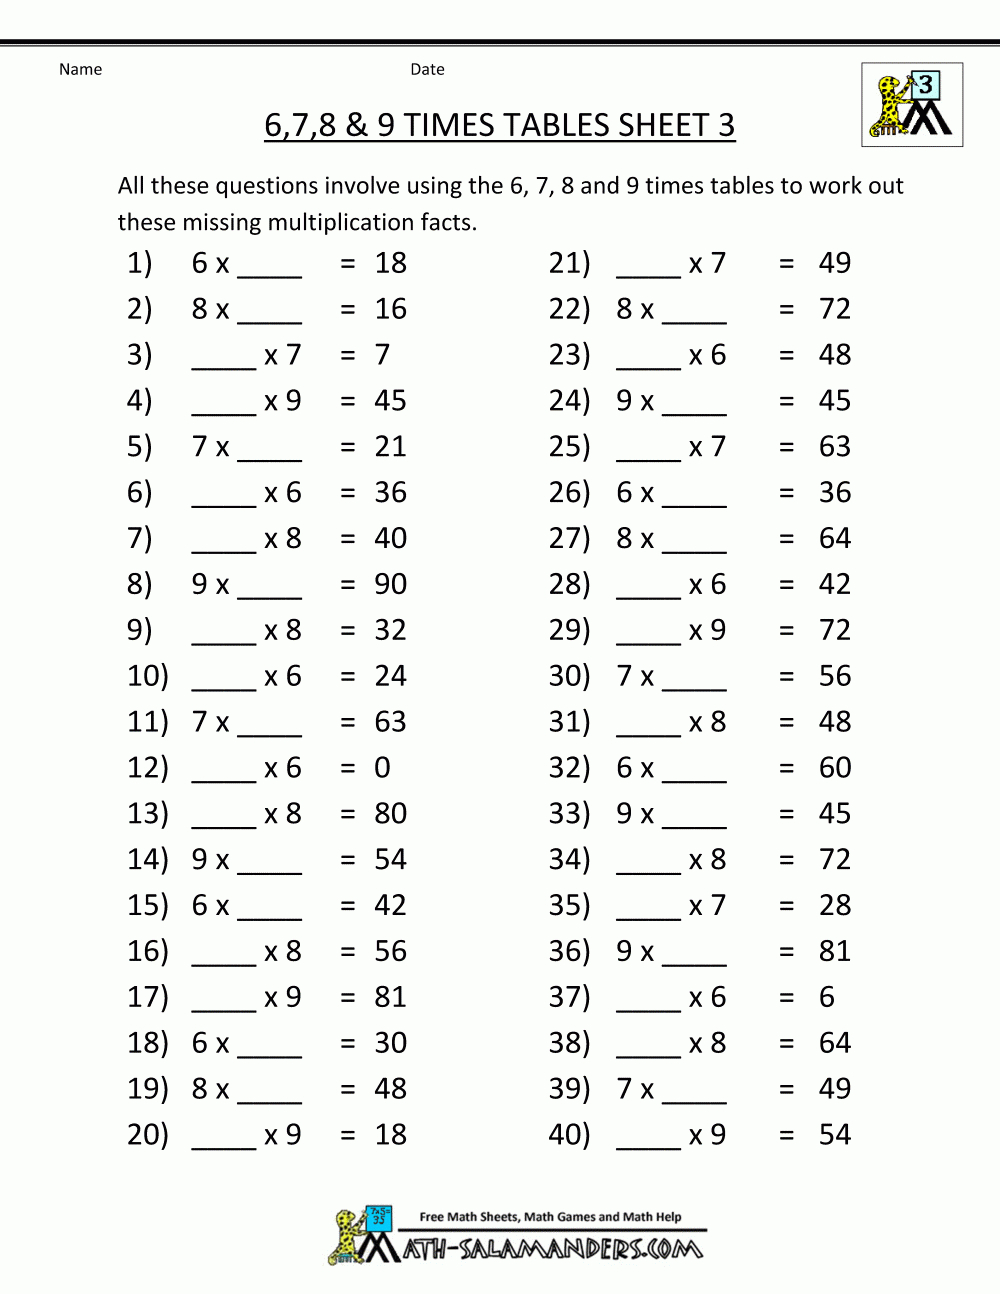 Free Multiplication Worksheets 6 7 8 9 Times Tables 3 regarding Multiplication Worksheets 8 Tables